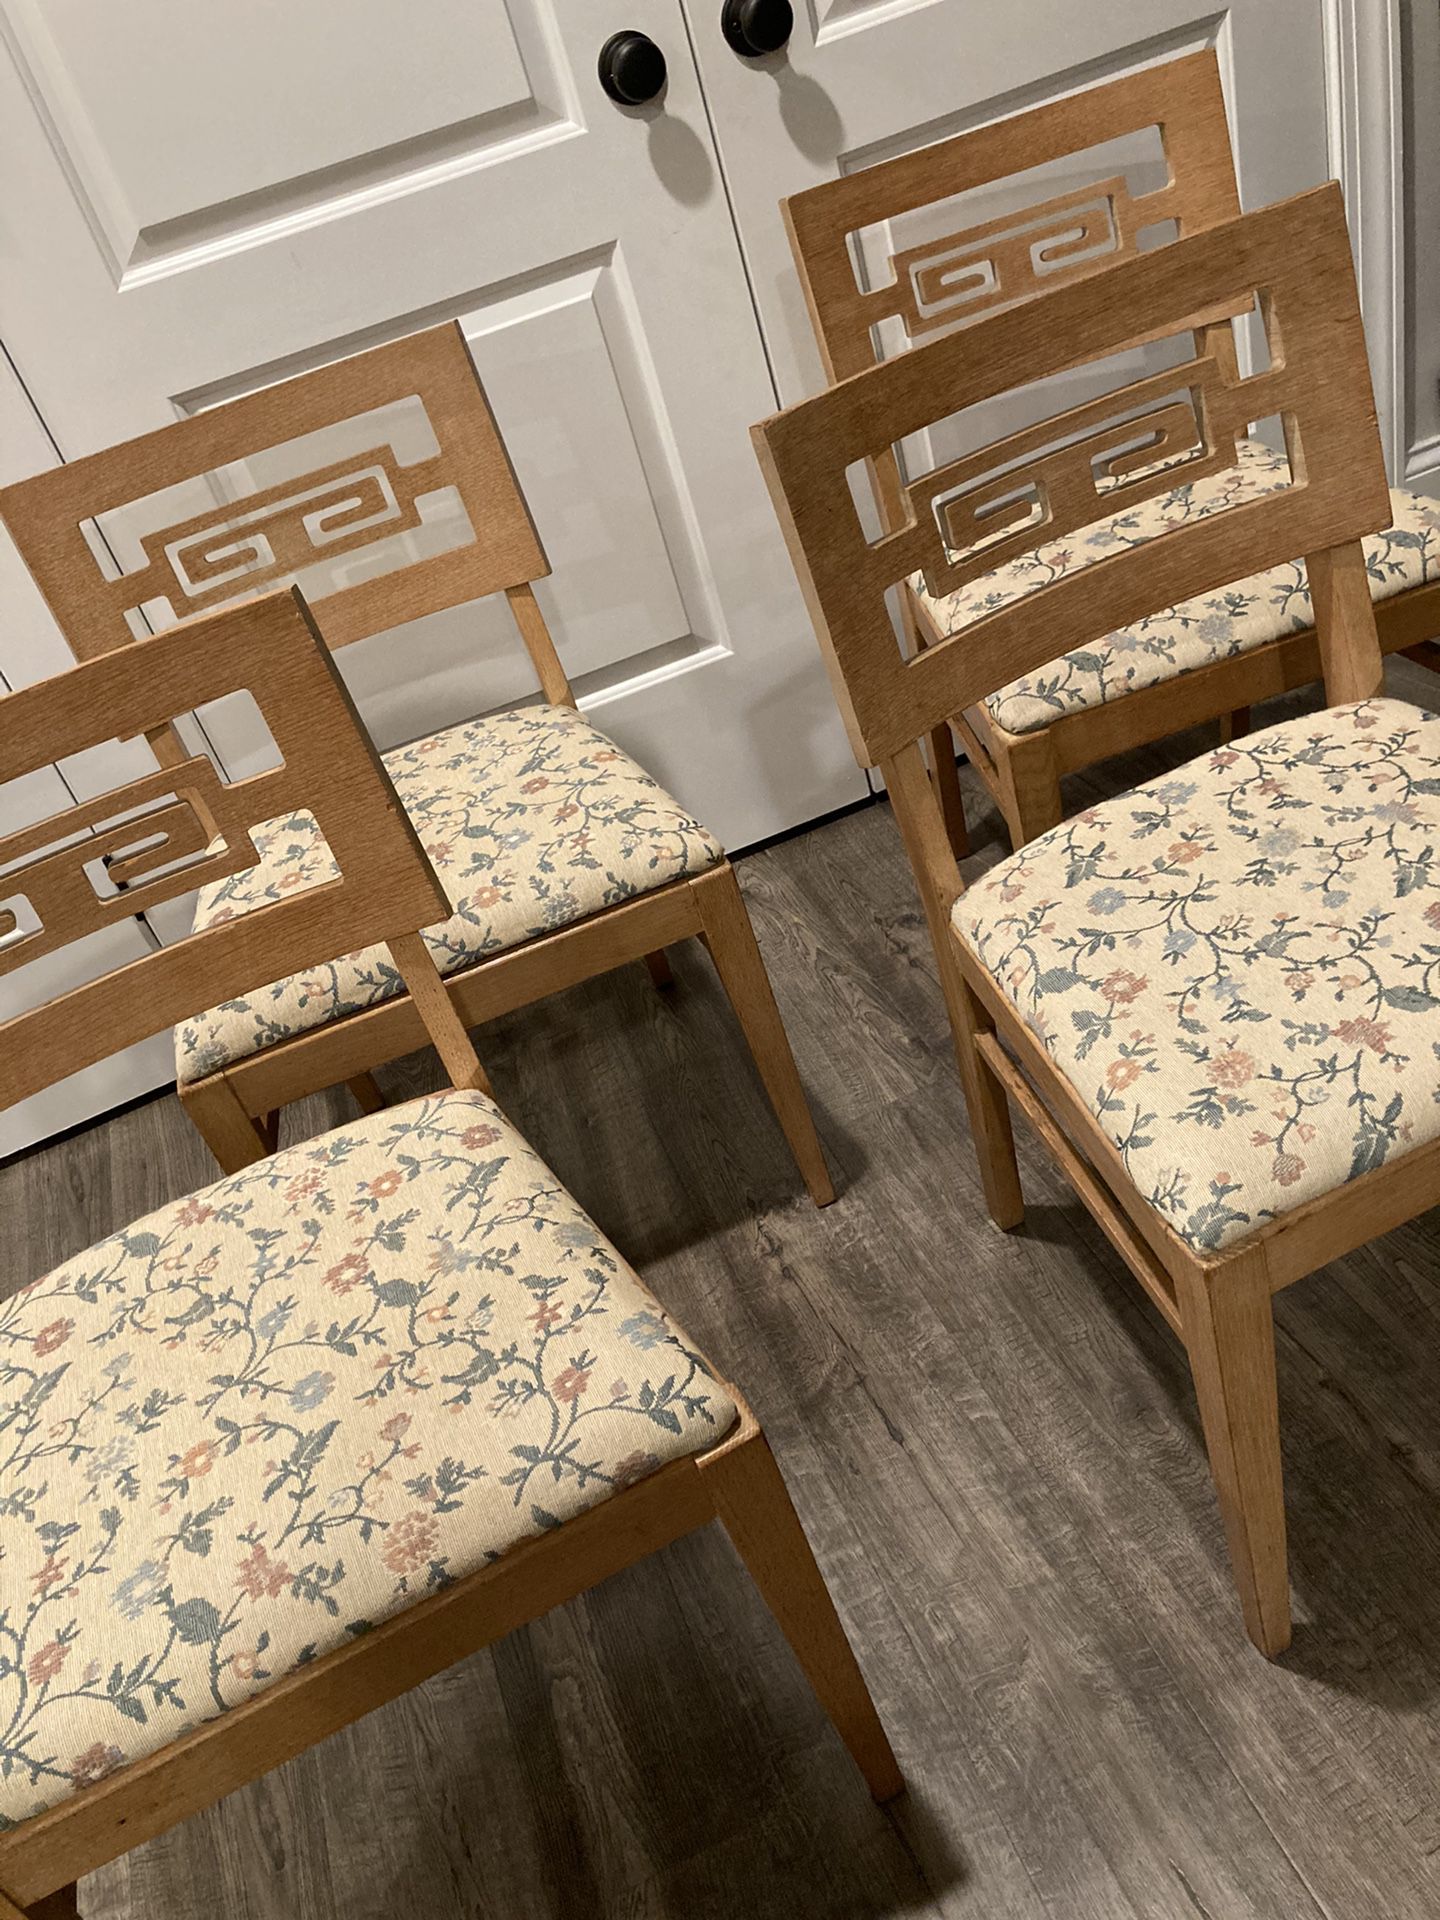 Hollywood Regency style set of four chairs